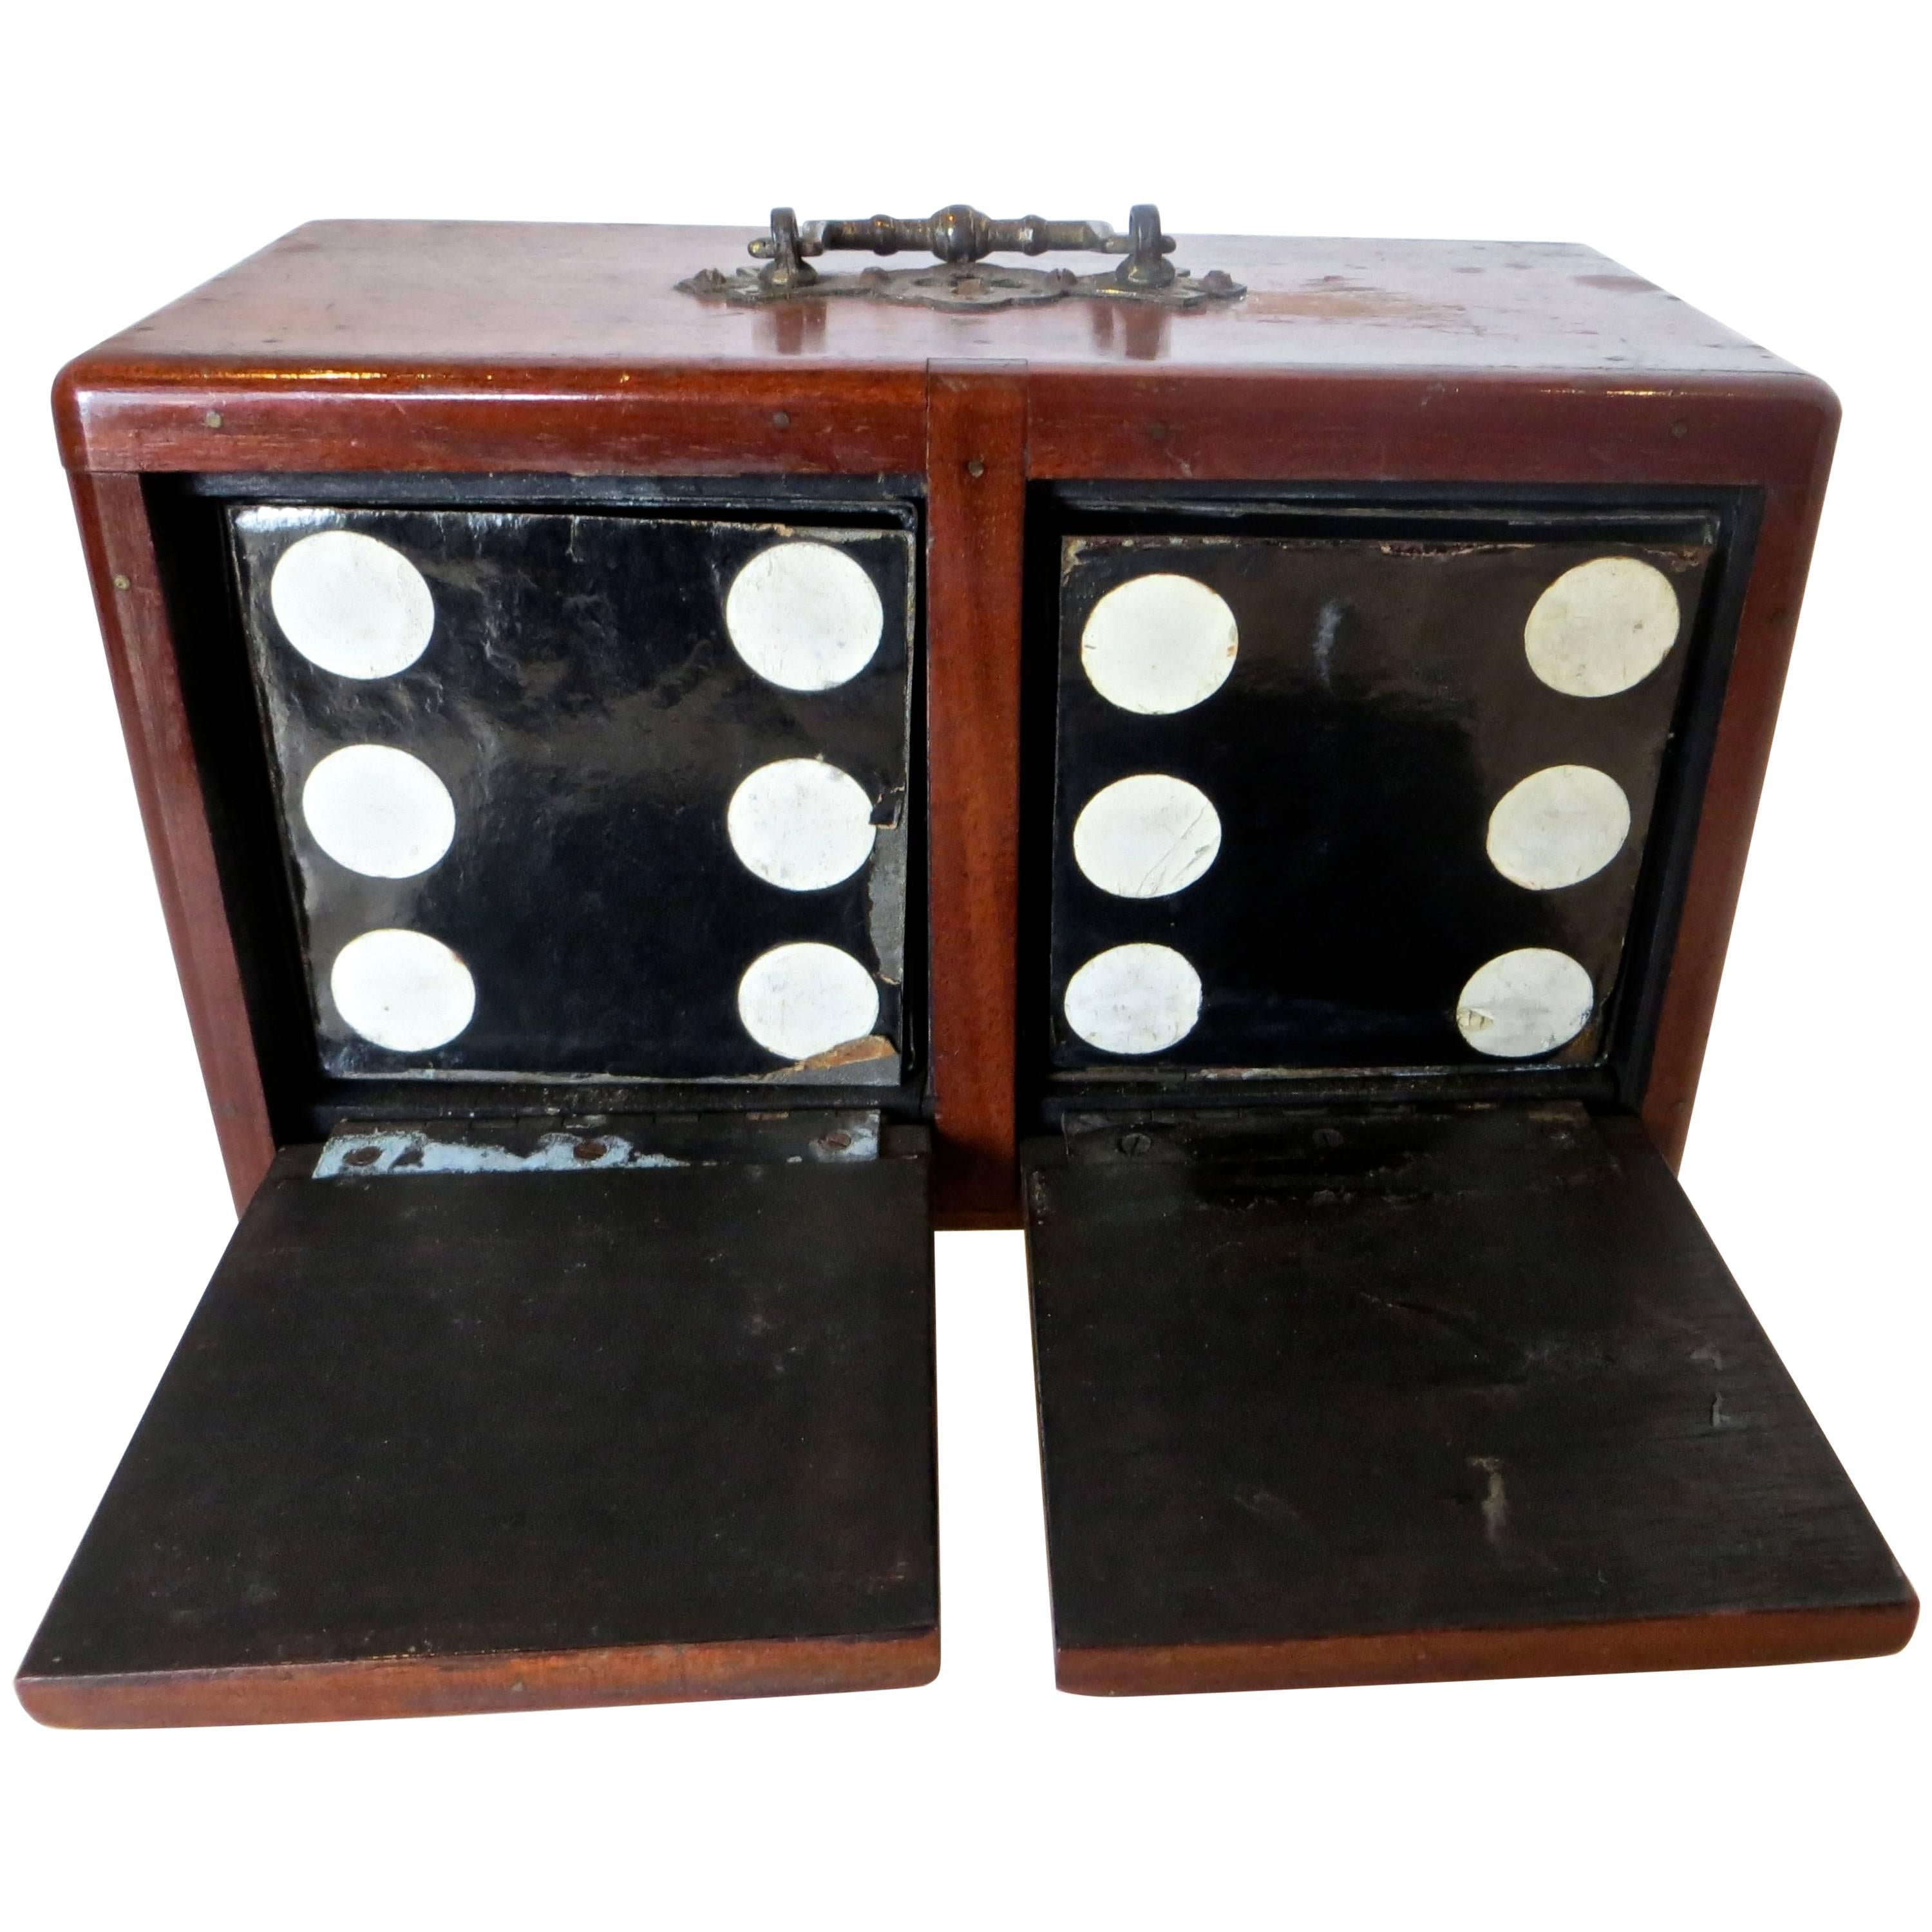 Two-Sided Four-Door Box with Pair of Dice, Magic Trick, circa 1890